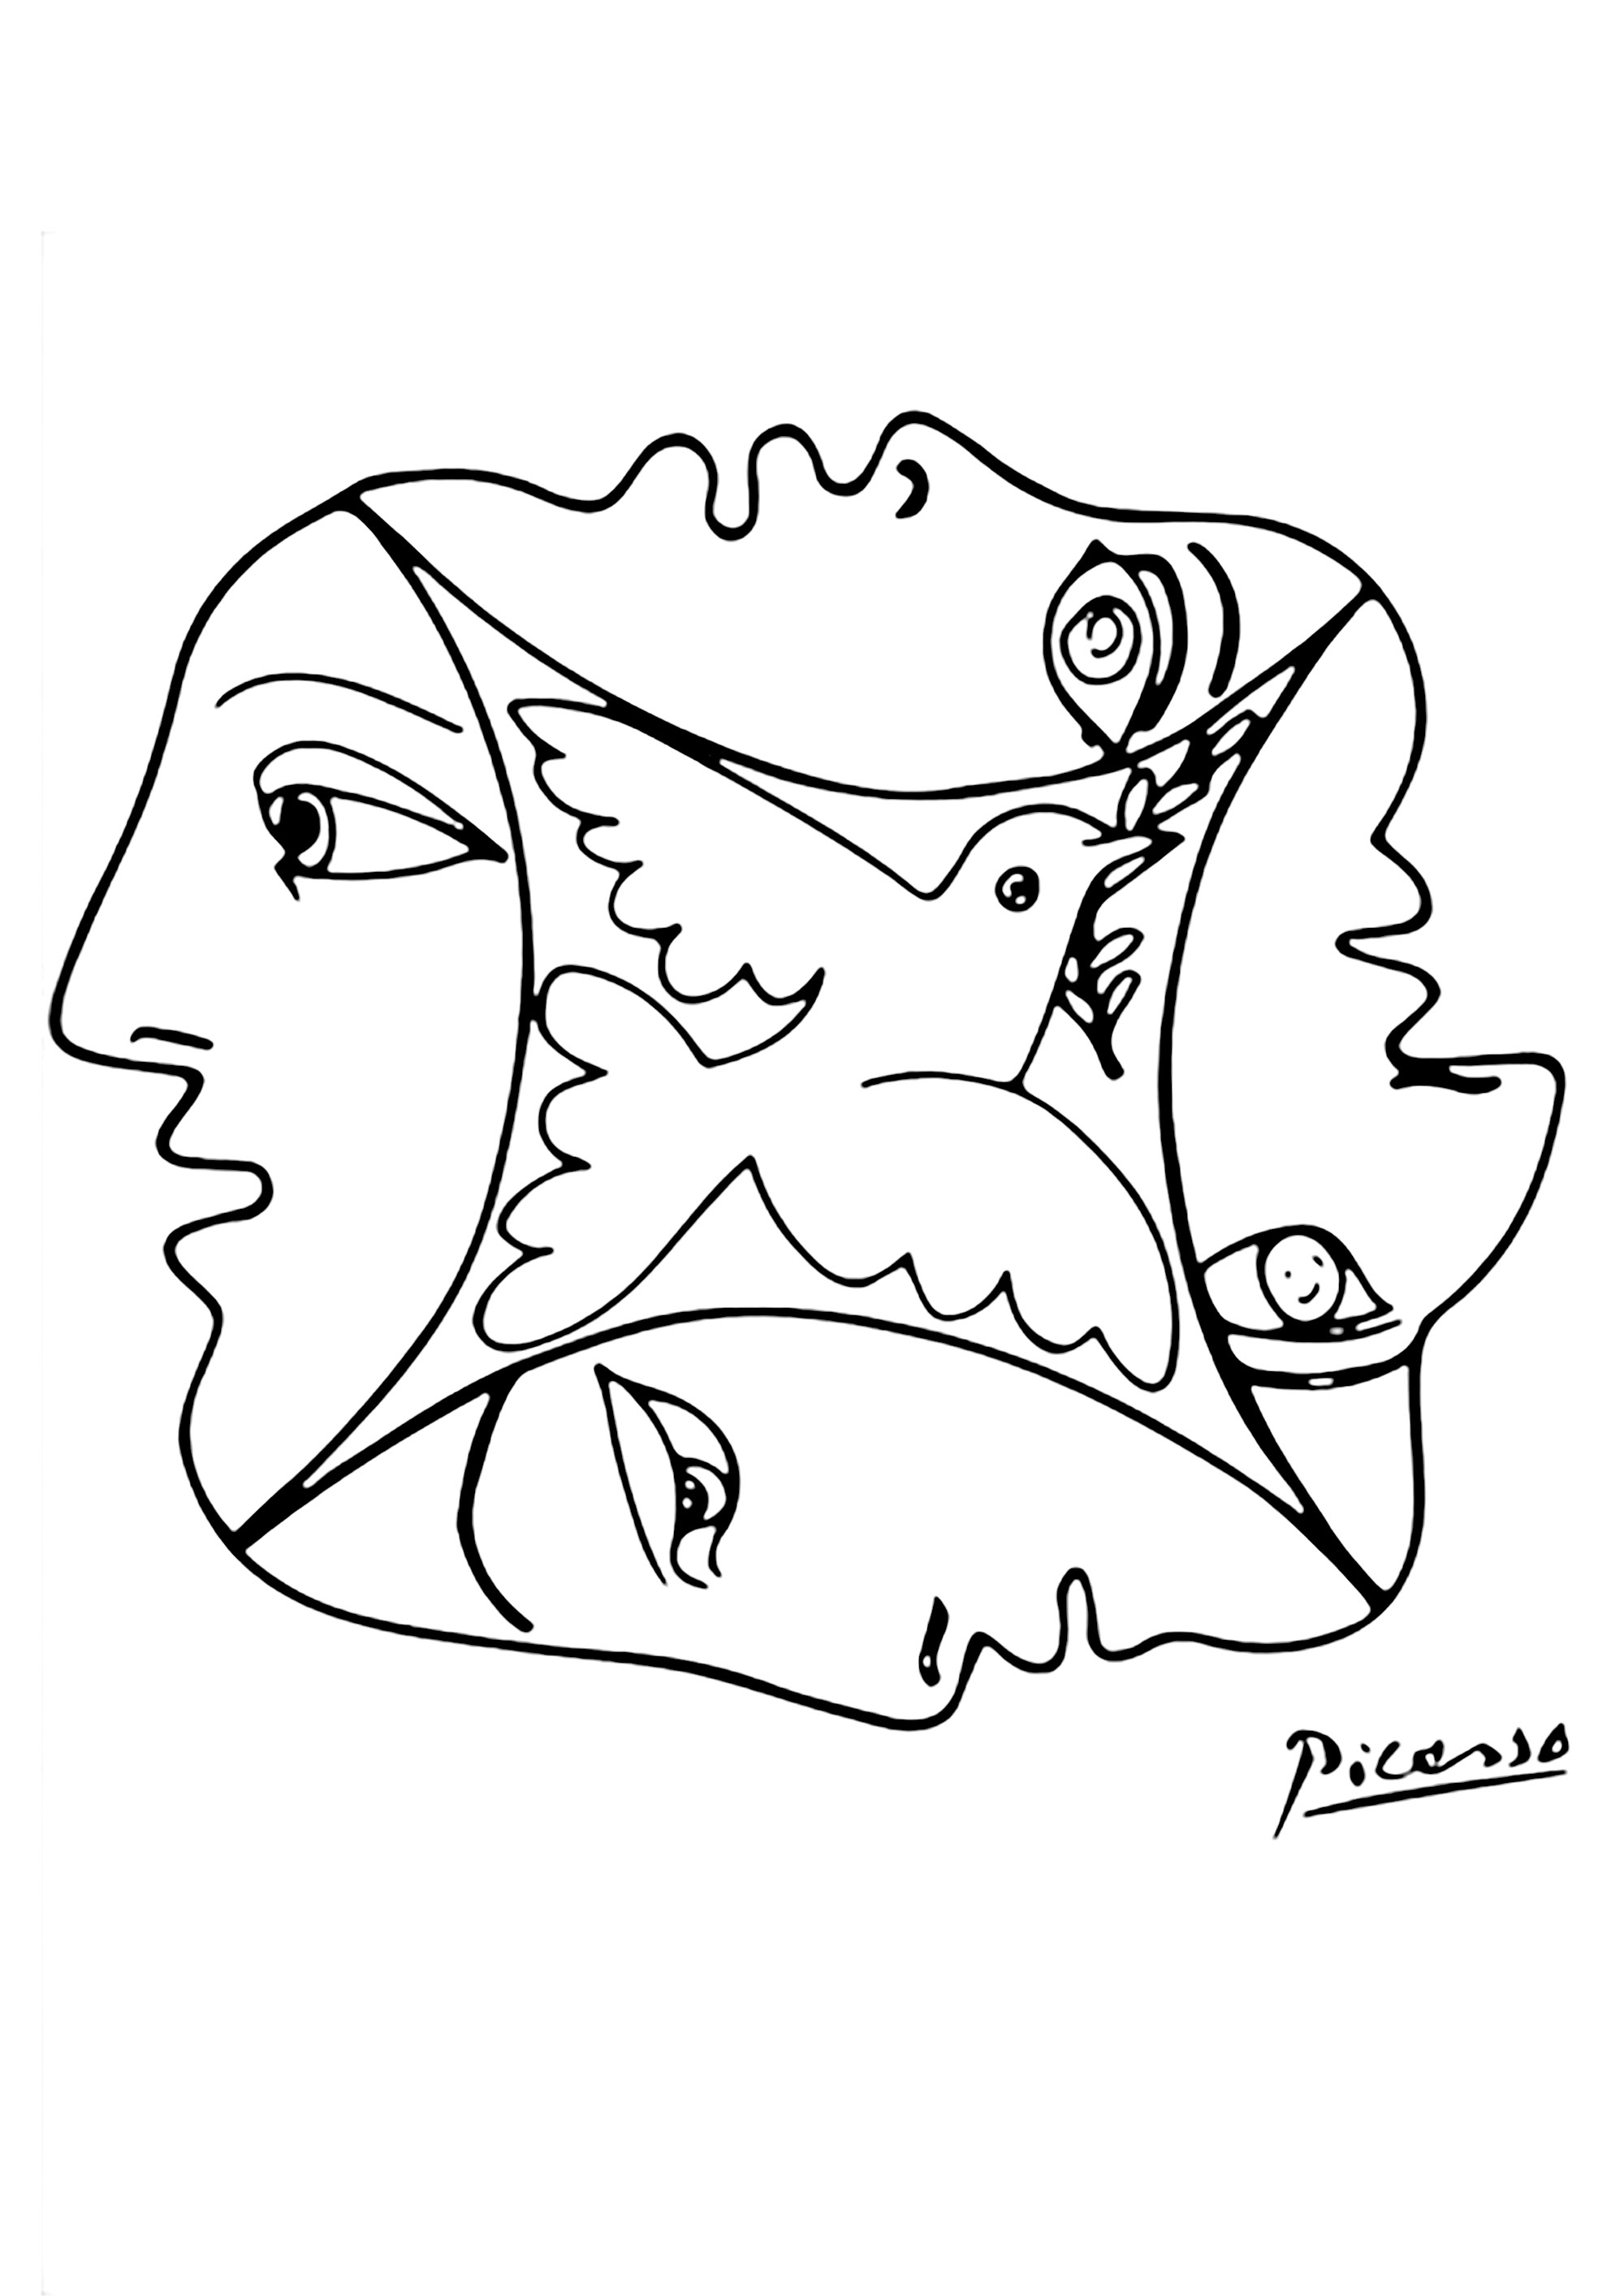 Drawing by Pablo Picasso with a dove and faces. A drawing representing peace and fraternity